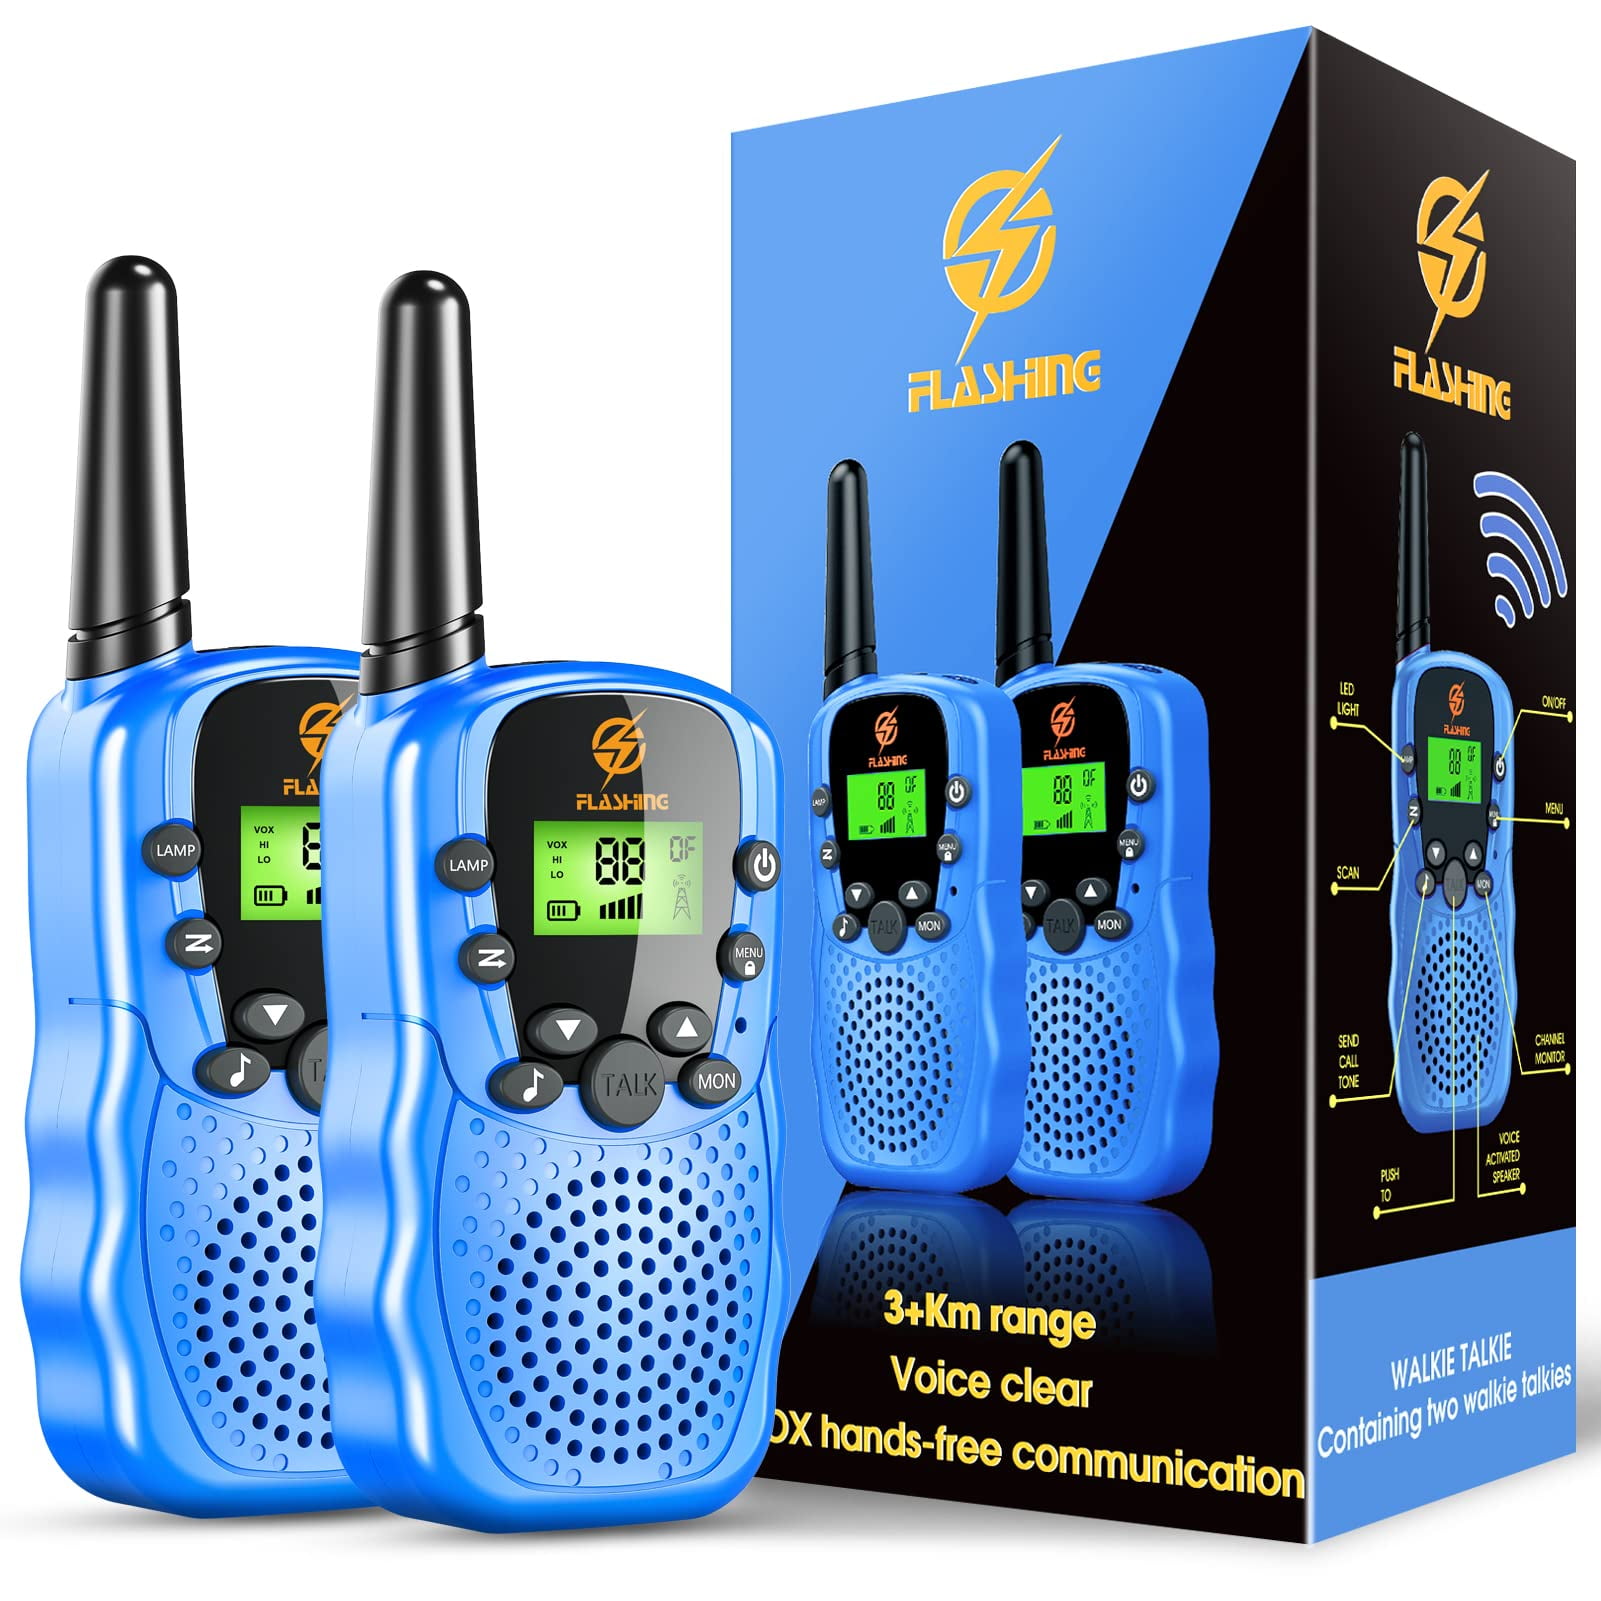 Blue Walkie Talkies,LEETEL Walkie Talkies Long Range Up to 5 Miles with 22 Channels,Walkie Talkies for Adults with VOX Scan Flashlight for Family Hiking Cycling Camping Outdoor Activities 